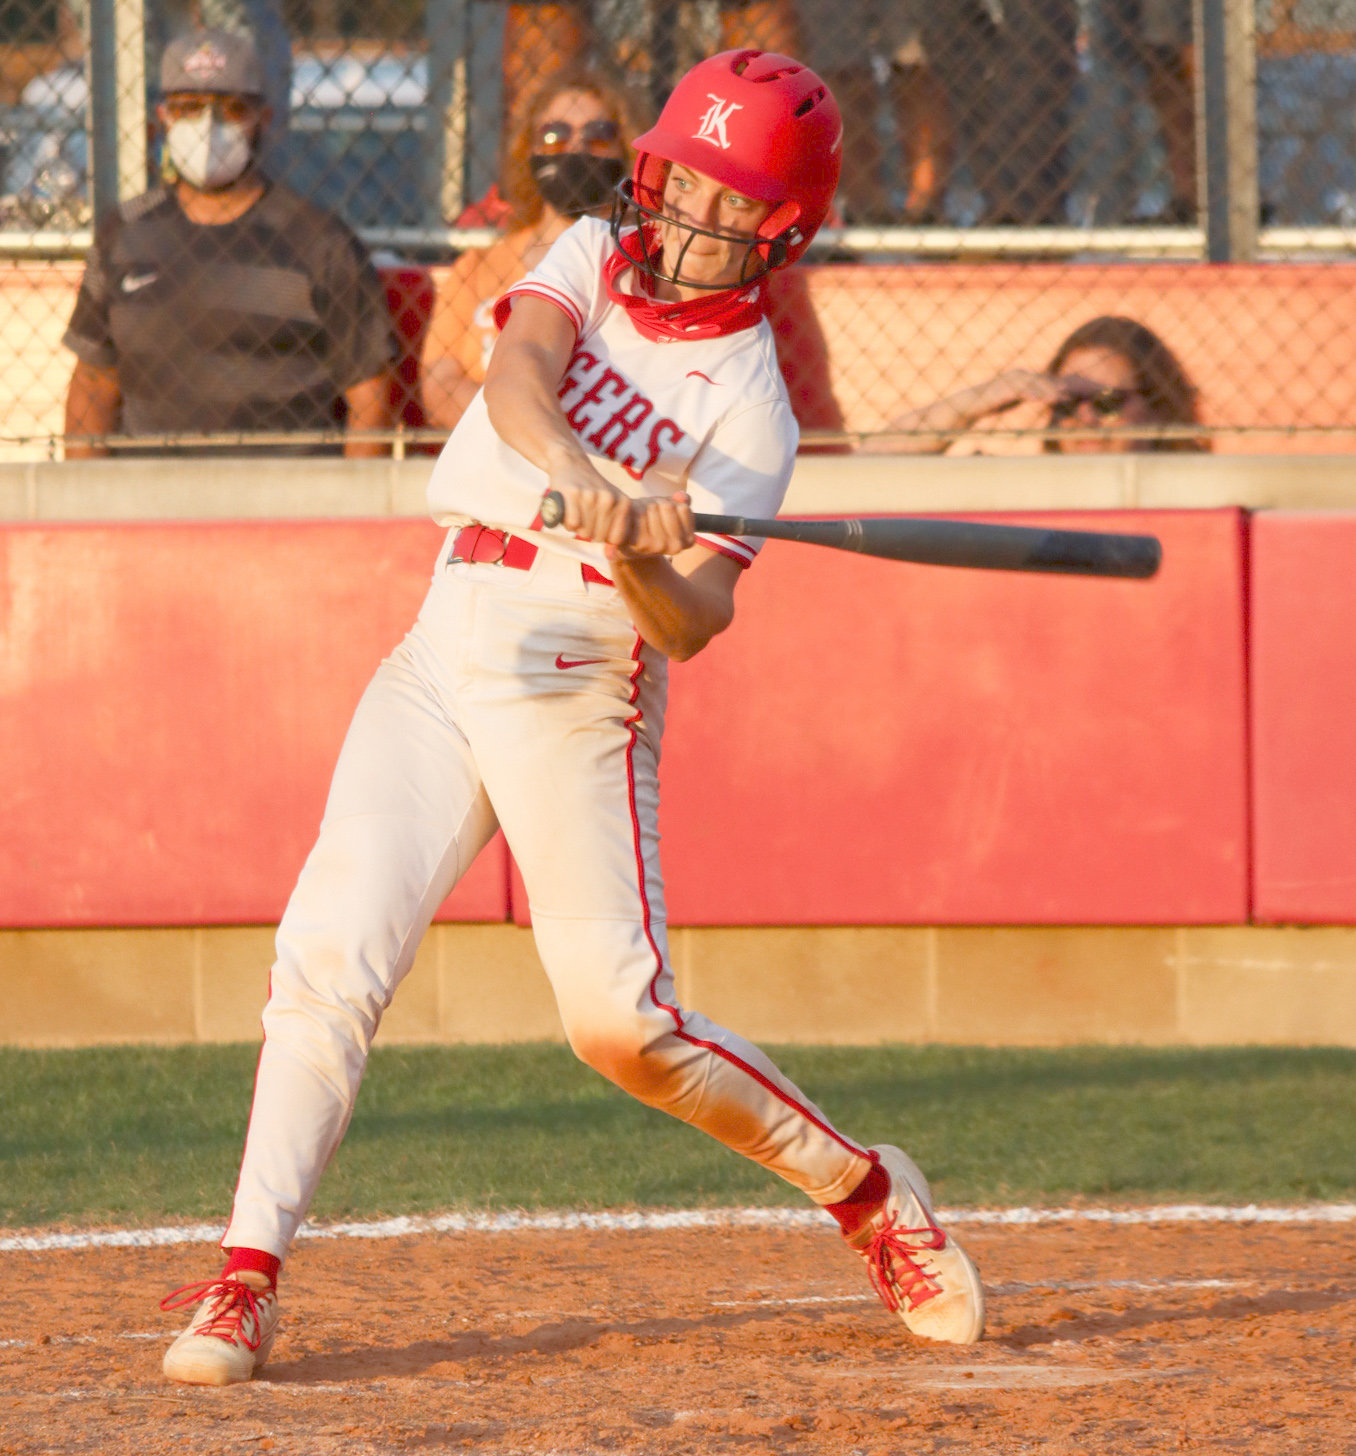 Katy High junior Kailey Wyckoff awaits the pitch during Game 2 of the team’s area playoff series against Houston Heights on Friday, May 7, at Katy High.